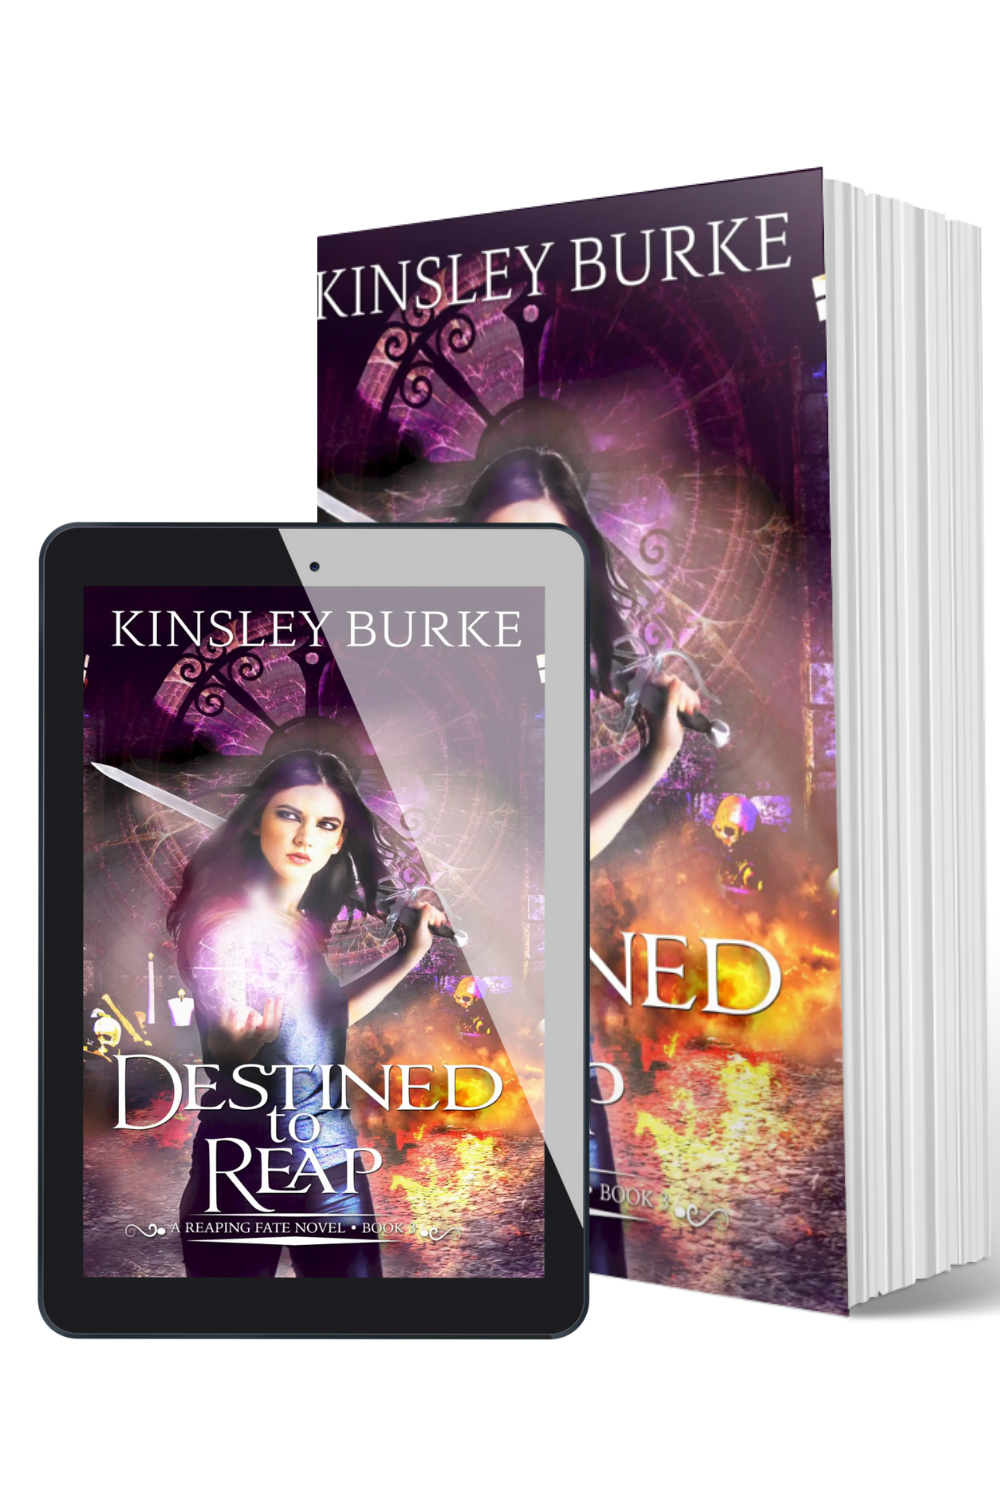 Cover Image of Destined to Reap by Kinsley Burke